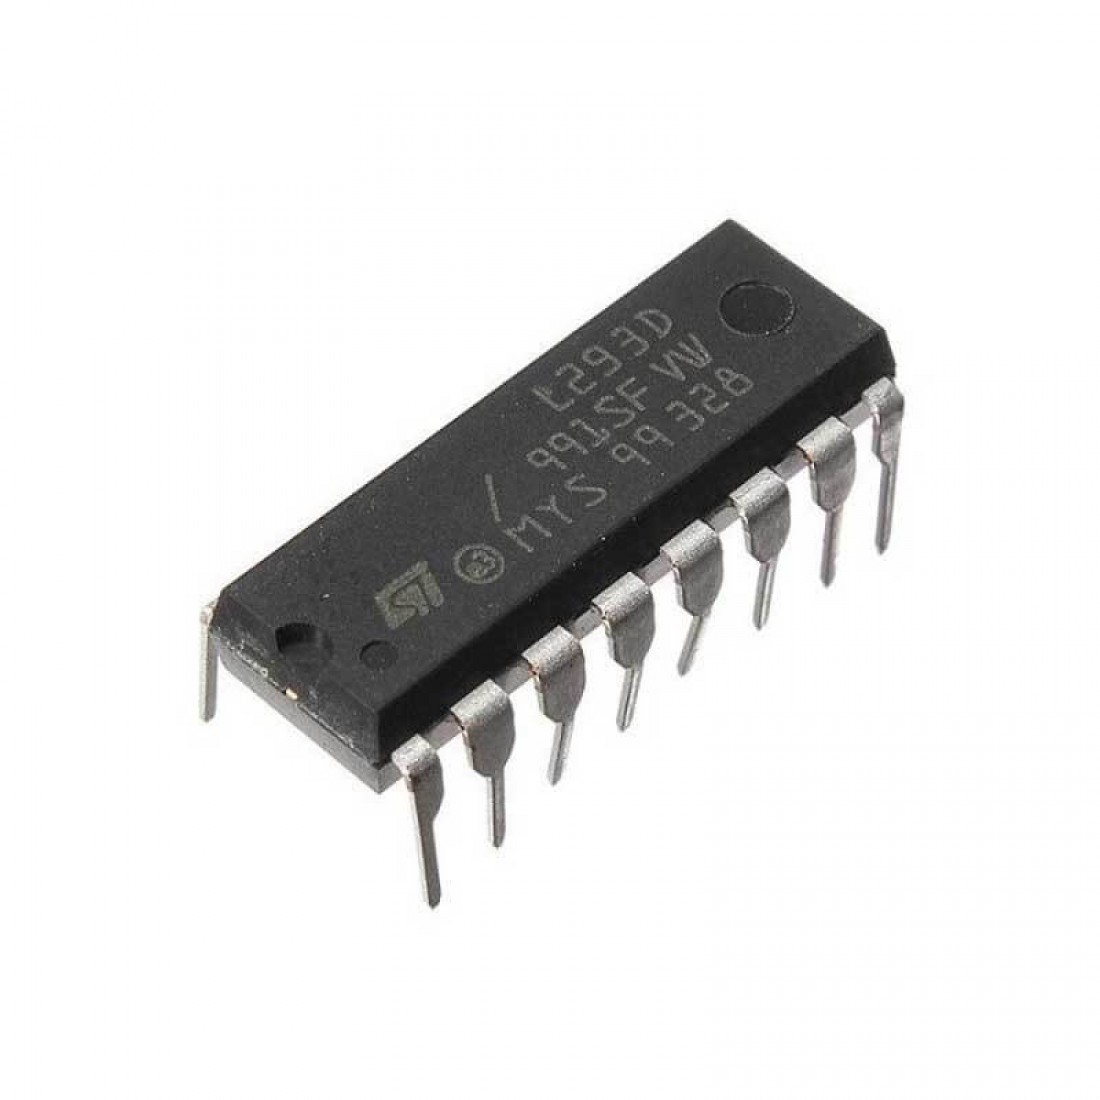 Buy L293d Motor Driver Ic Online India Component7